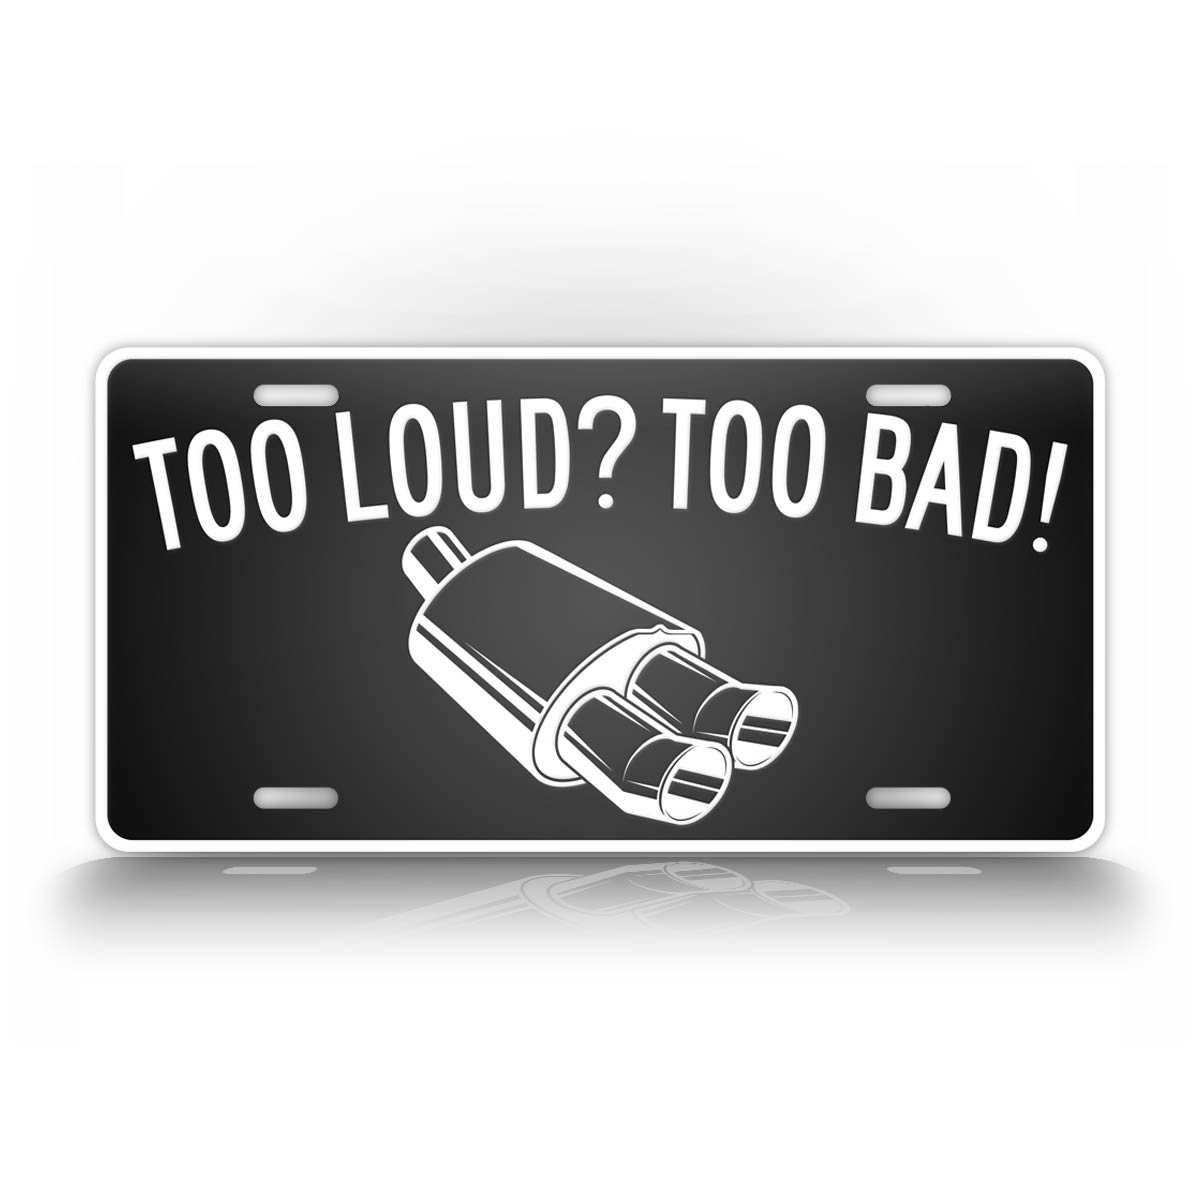 To loud? To Bad! Loud Car And Truck License Plate 